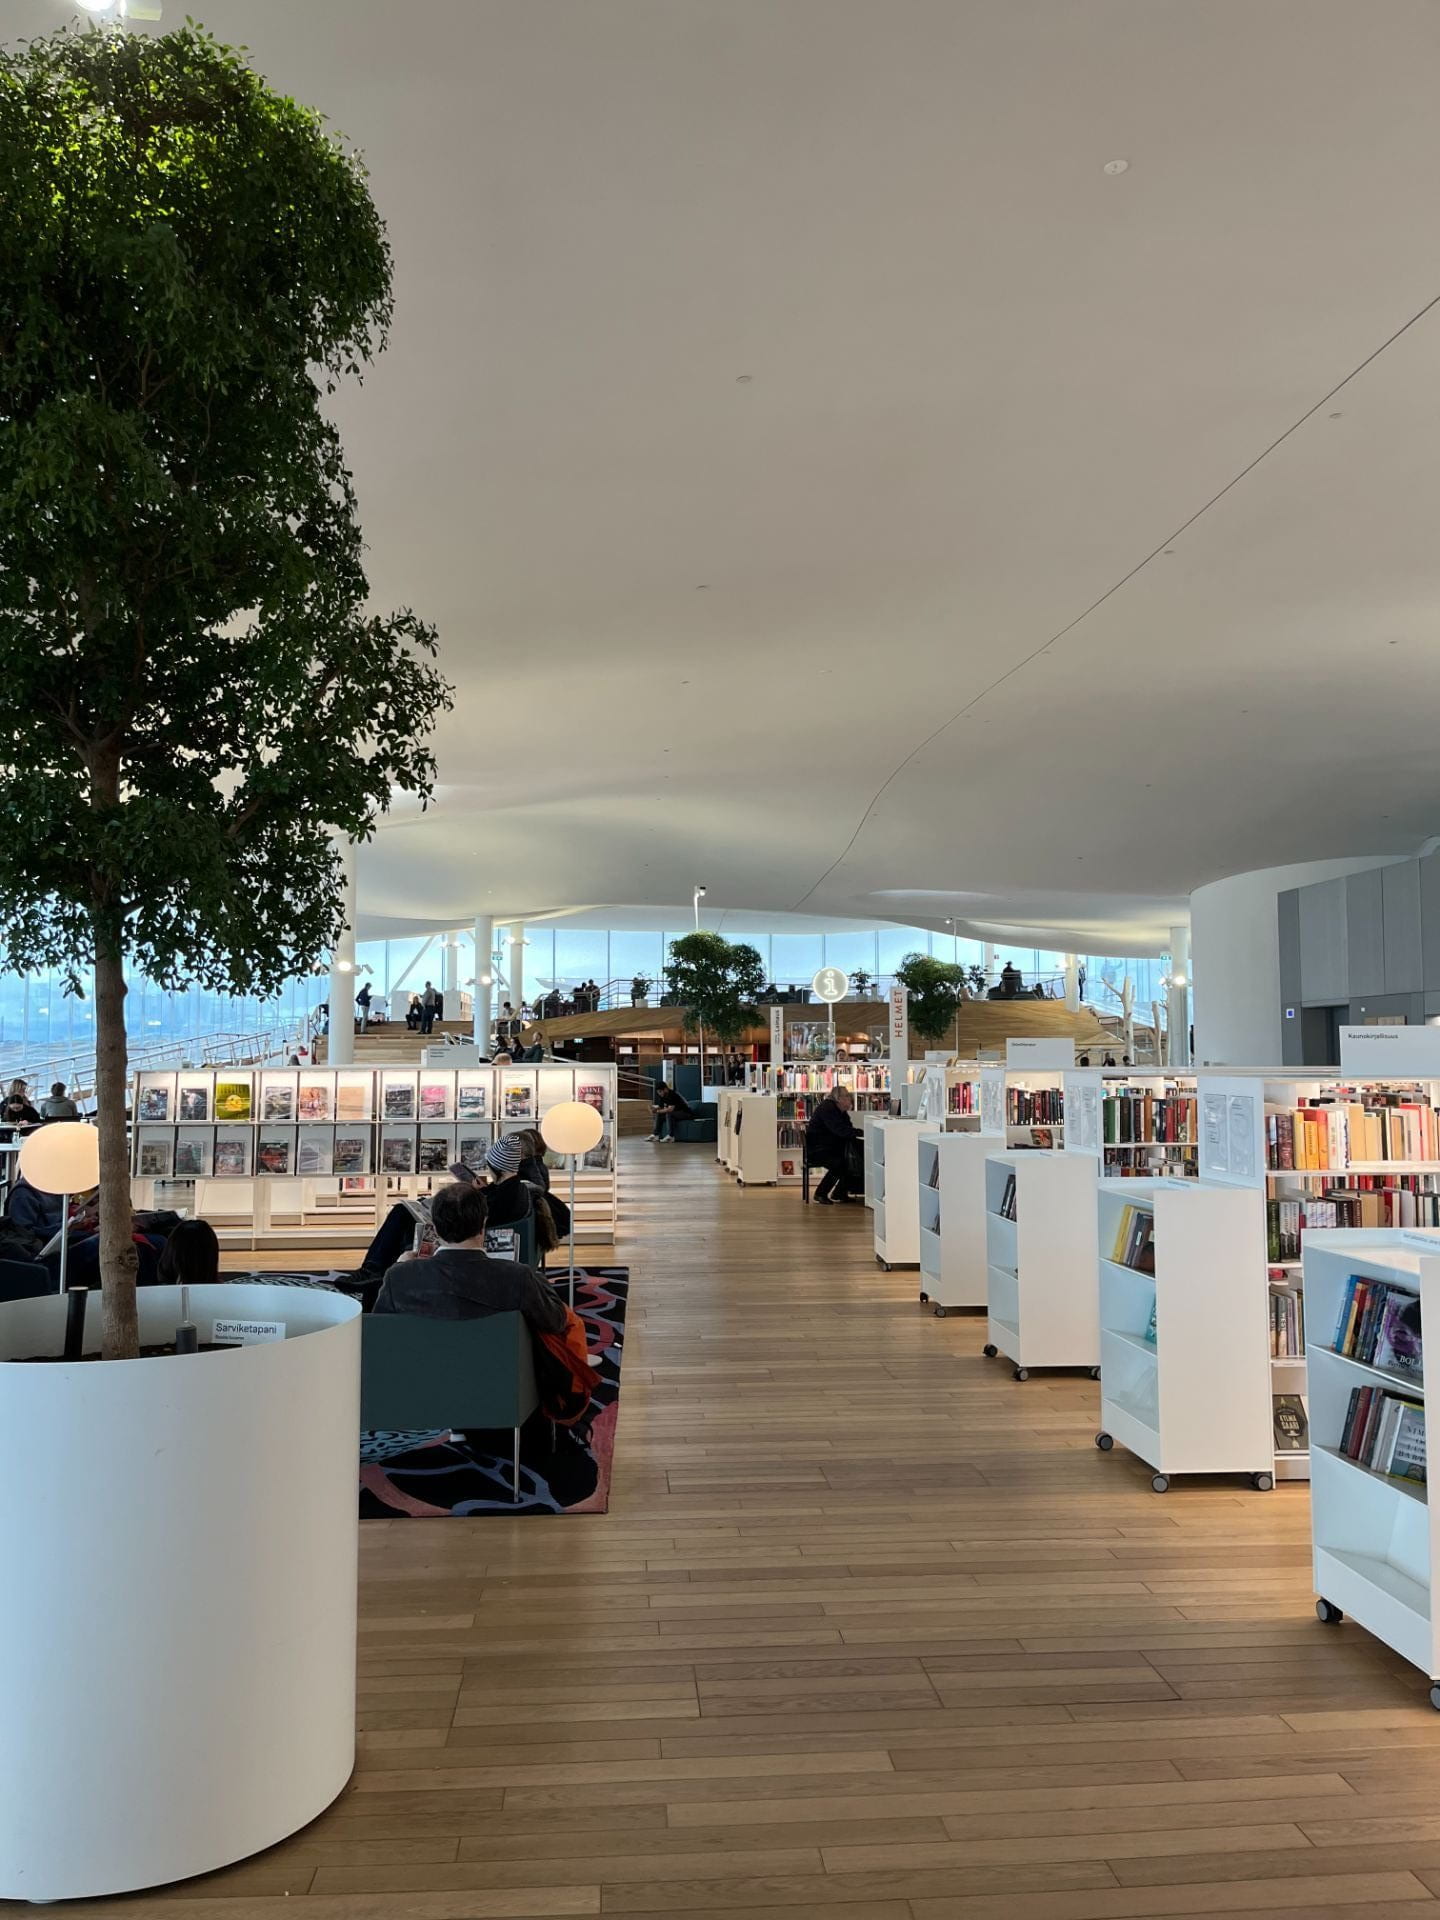 Library space with bookshelves to the right and a large indoor tree to the left